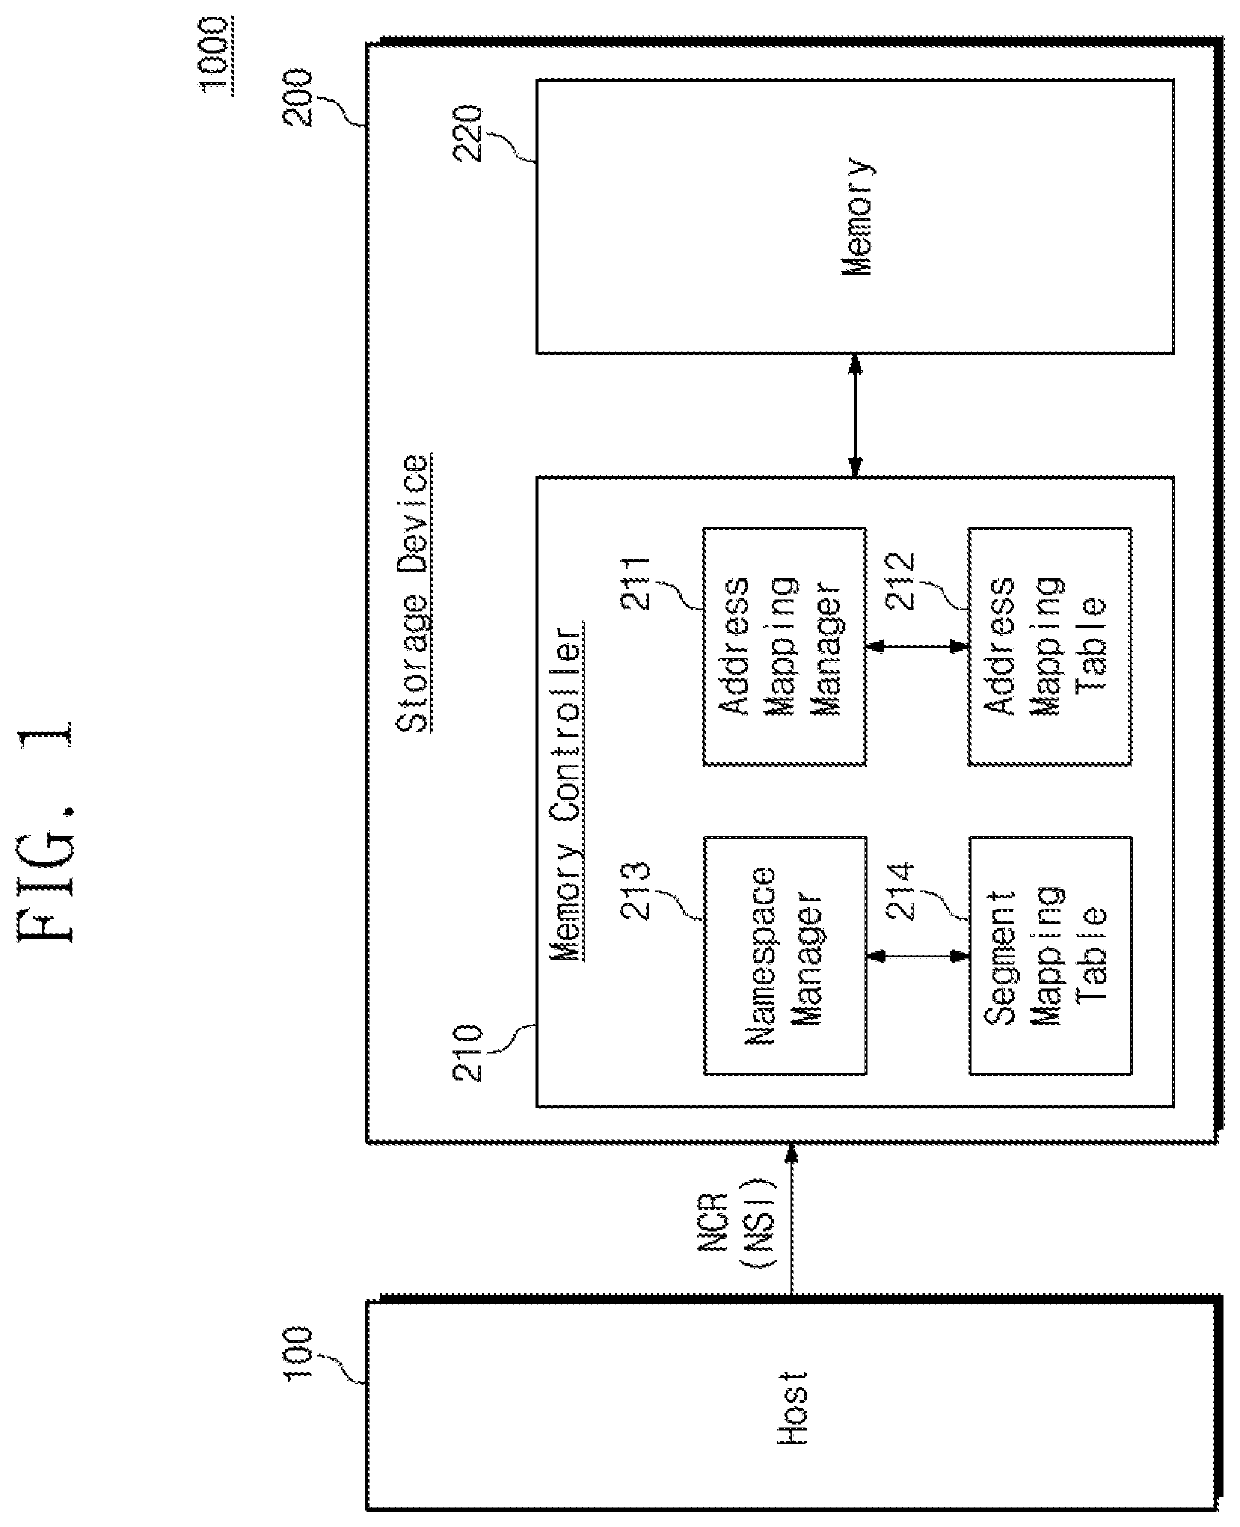 Storage device with expandable logical address space and operating method thereof